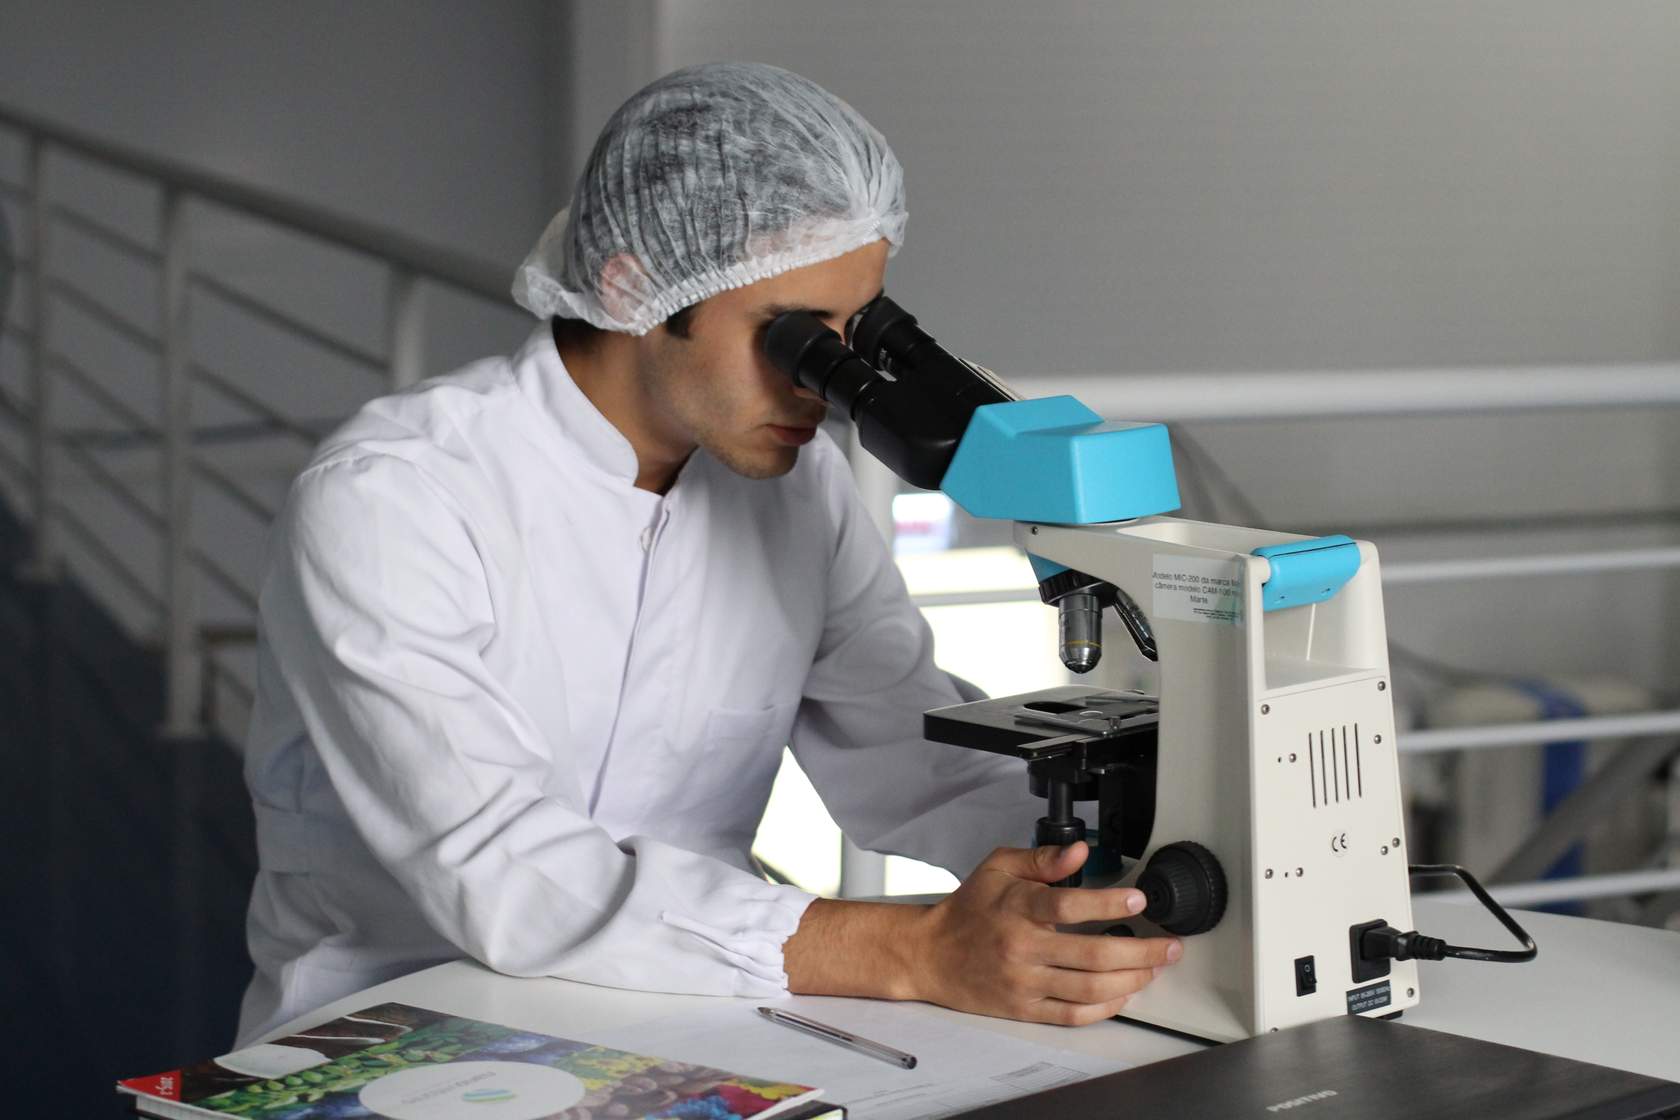 A man using a microscope in a laboratory.